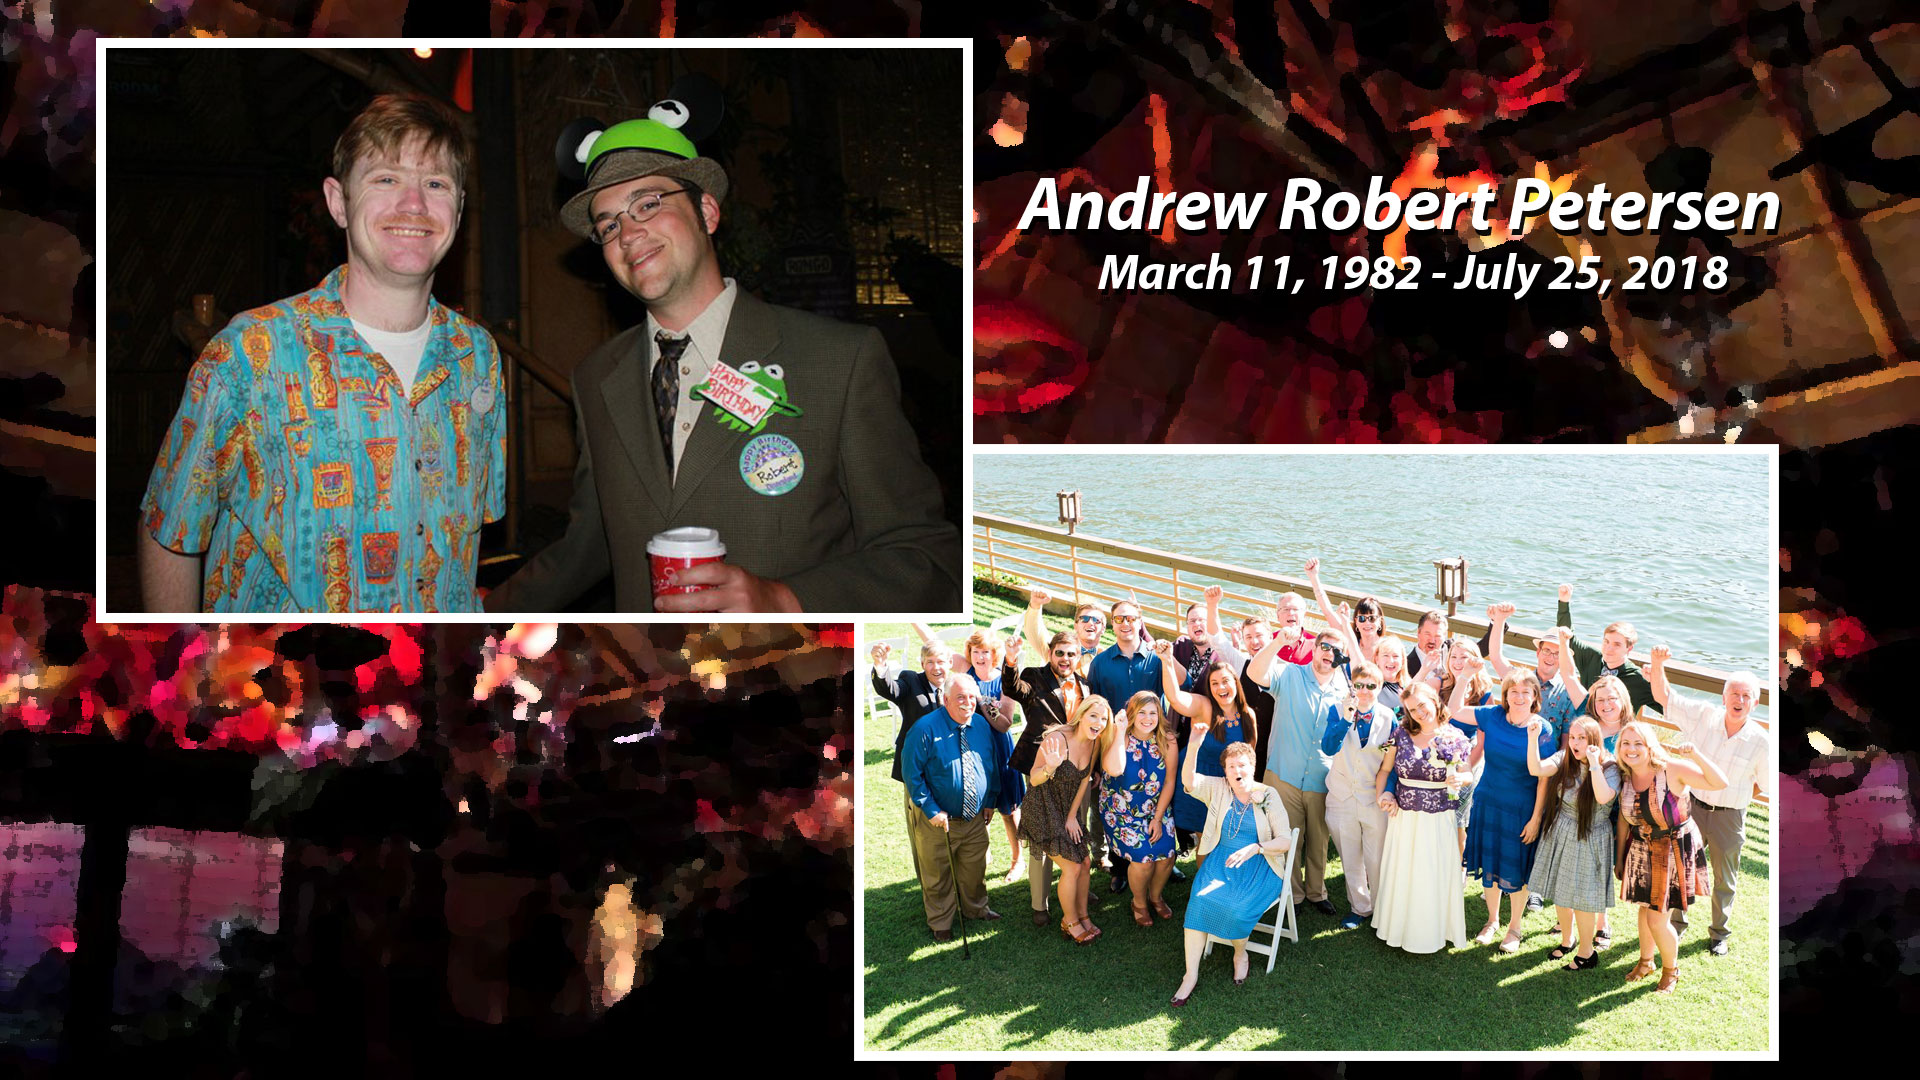 Andrew Petersen – A Man Who Knew How to Live and Live Positively